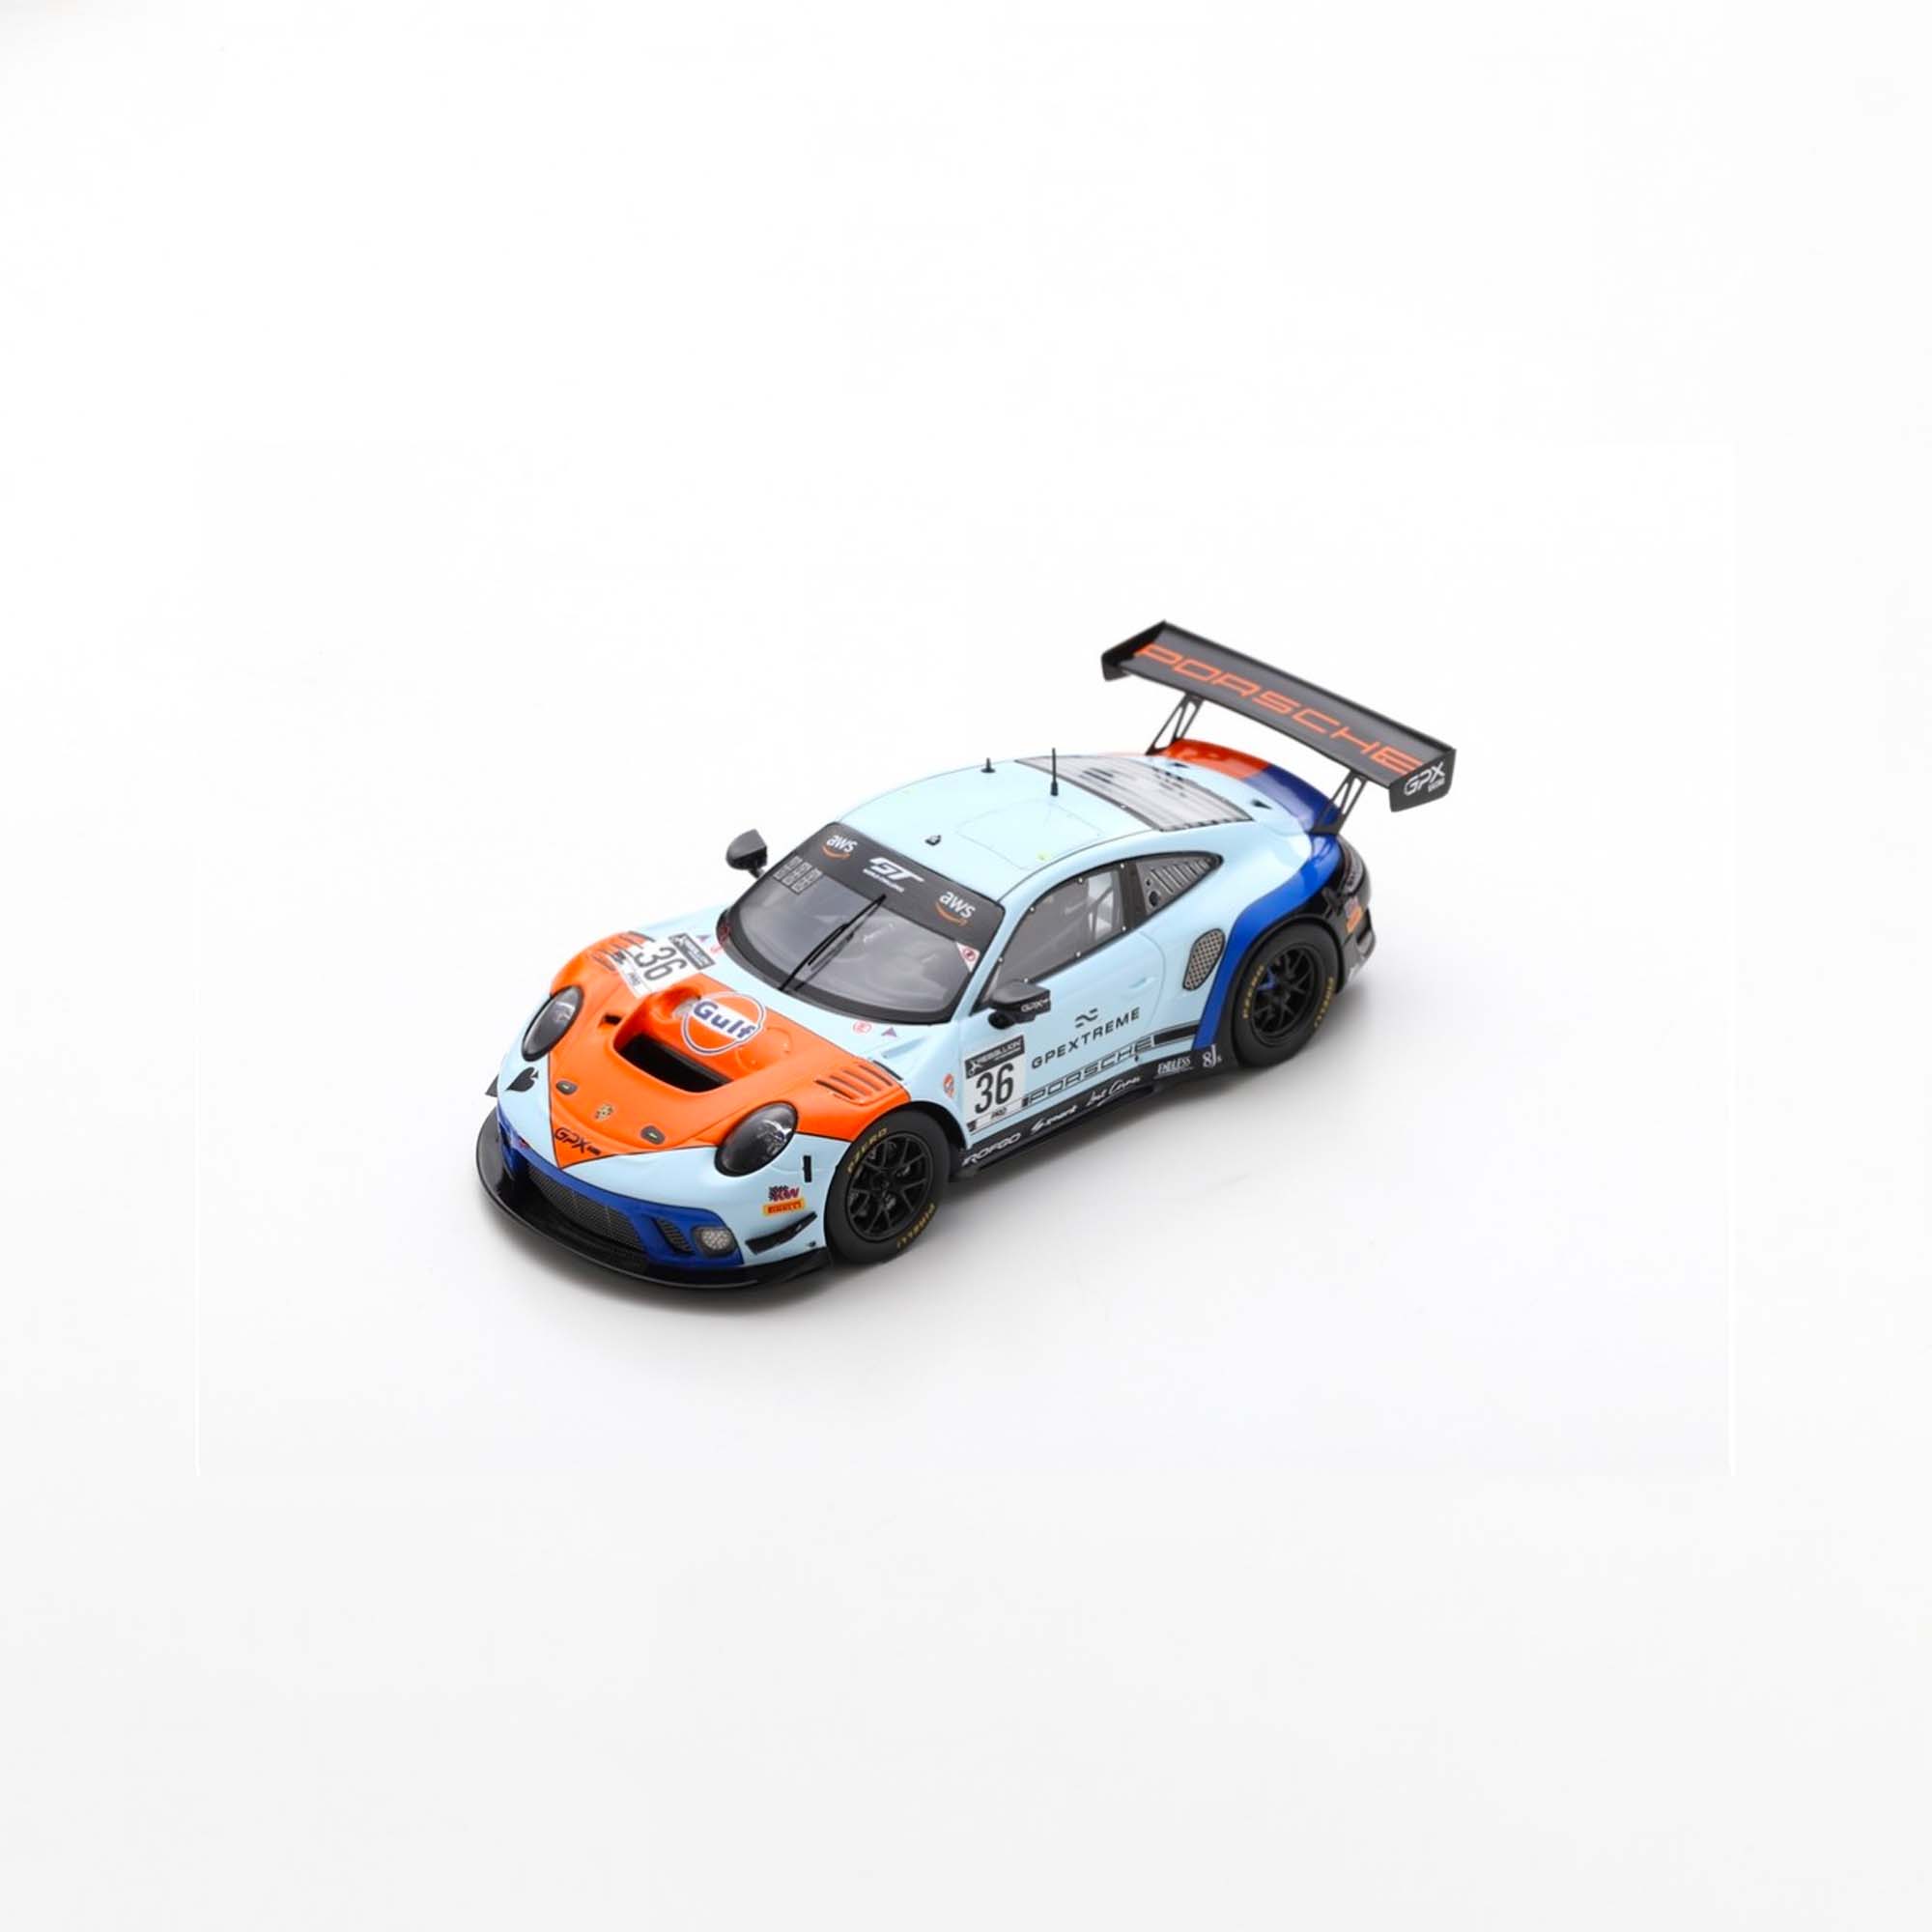 Porsche 911 GT3 R Team GPX Racing No.36 "The Spade" | 1:43 Scale Model-1:43 Scale Model-Spark Models-gpx-store